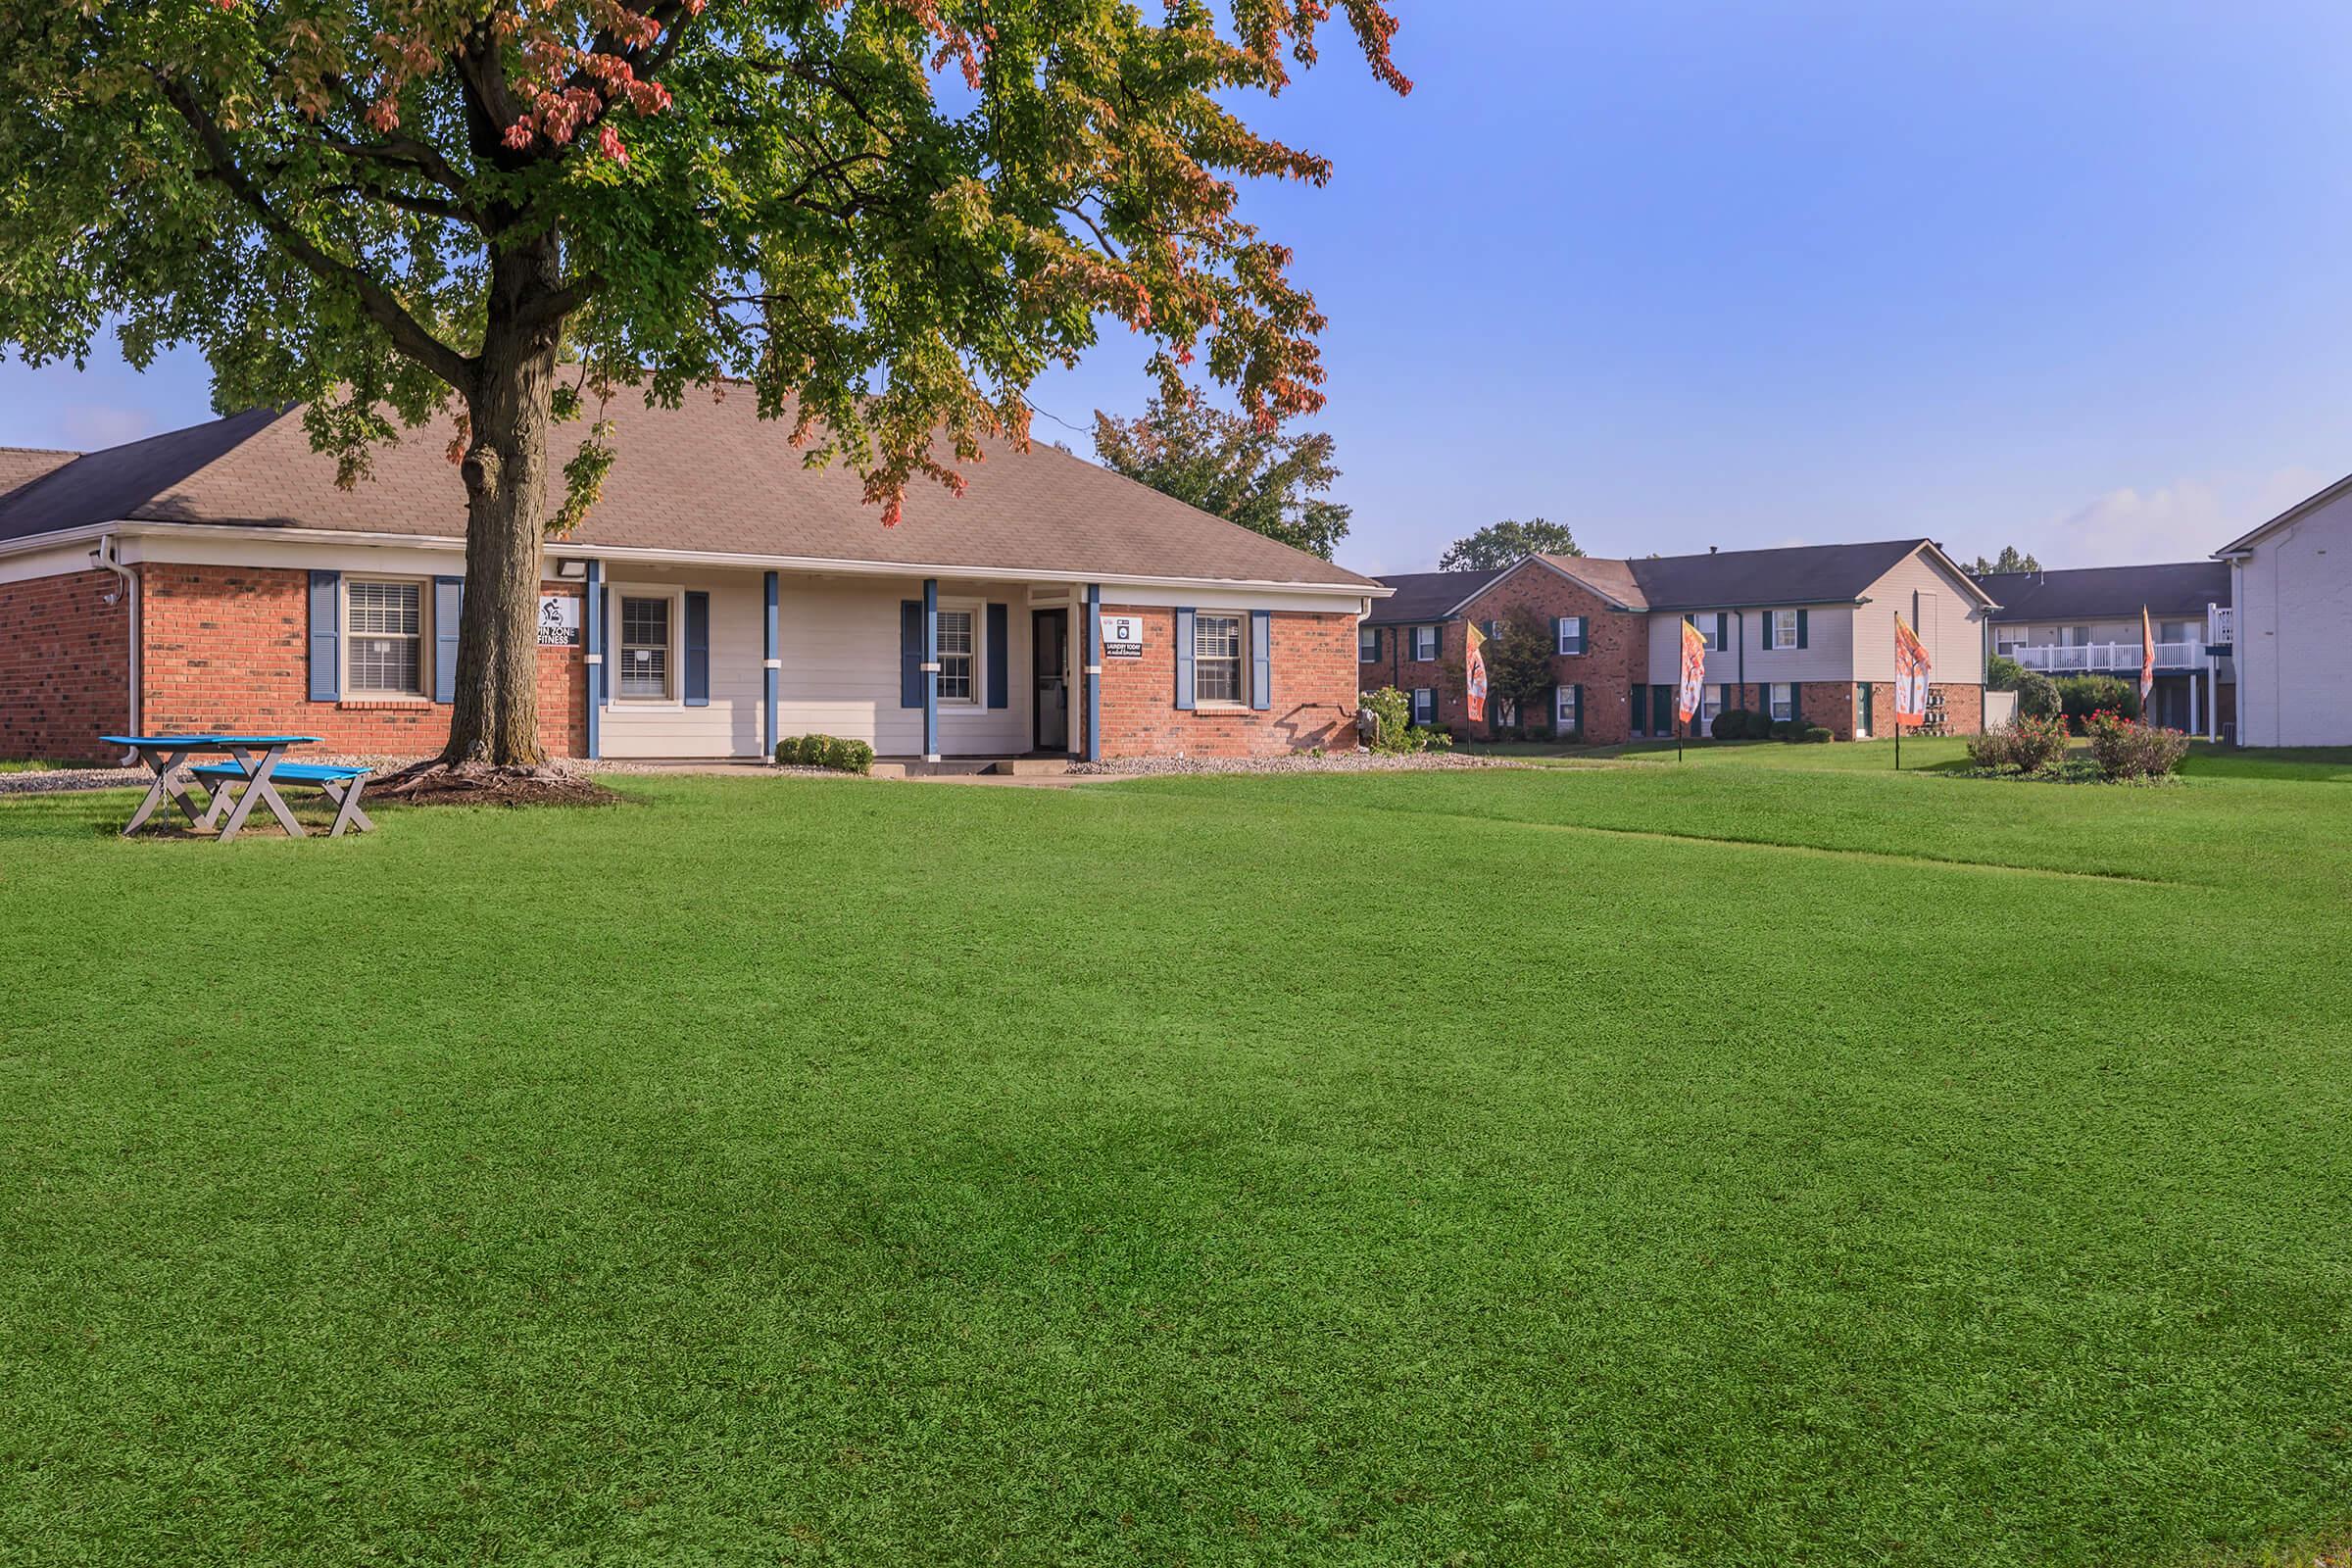 a large brick building with green grass in front of a house